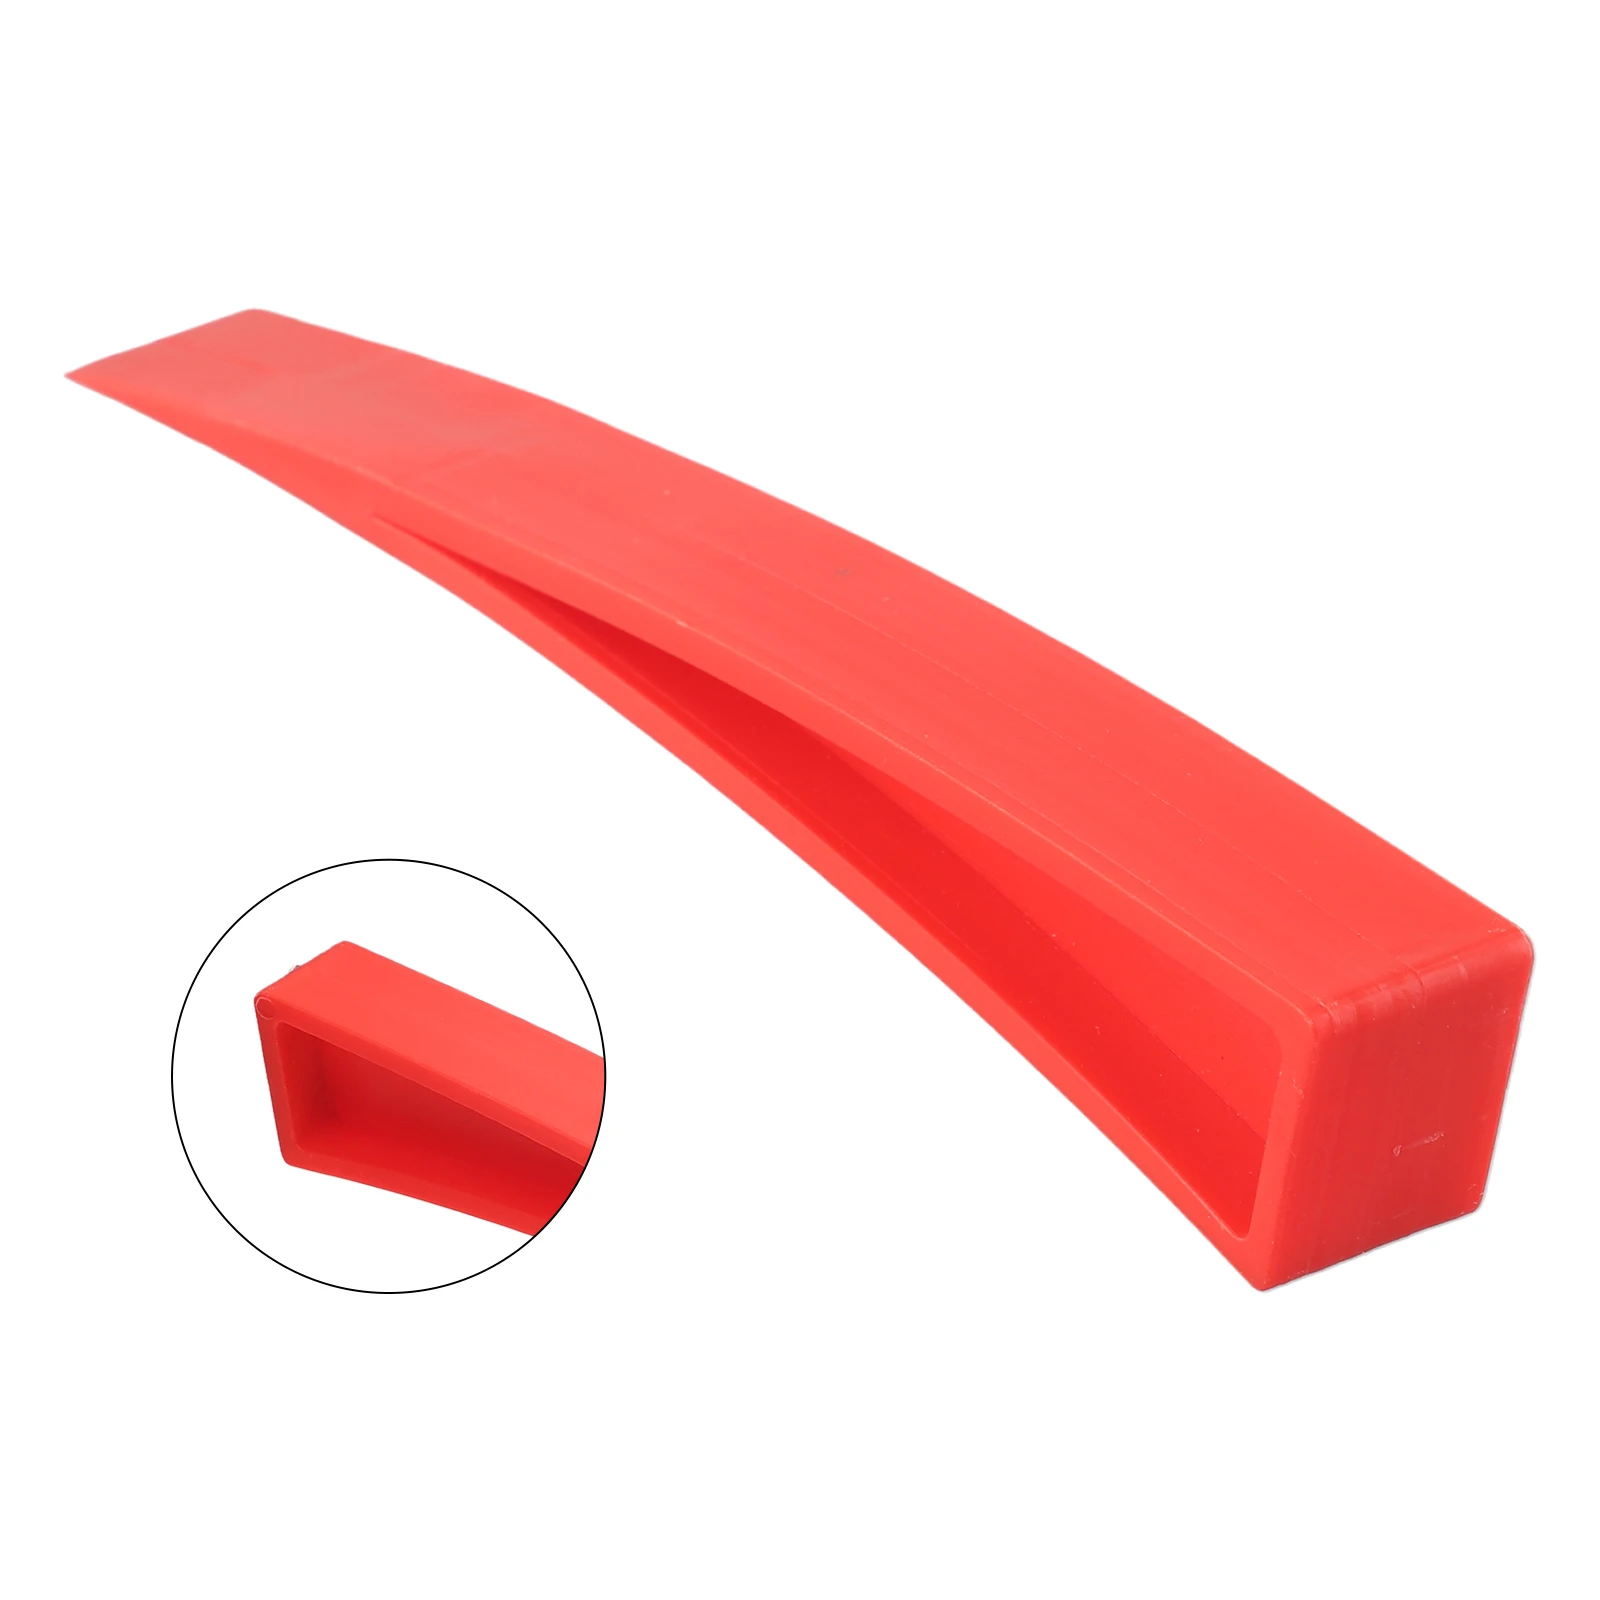 Red Auto/Car Door For Window Wedge Panel Paintless Dent Removal Repair Hand Tool Plastic-Accessories For Vehicles for proton x70 2018 2019 abs plastic chrome accessories door window glass lift control switch panel cover trim car styling